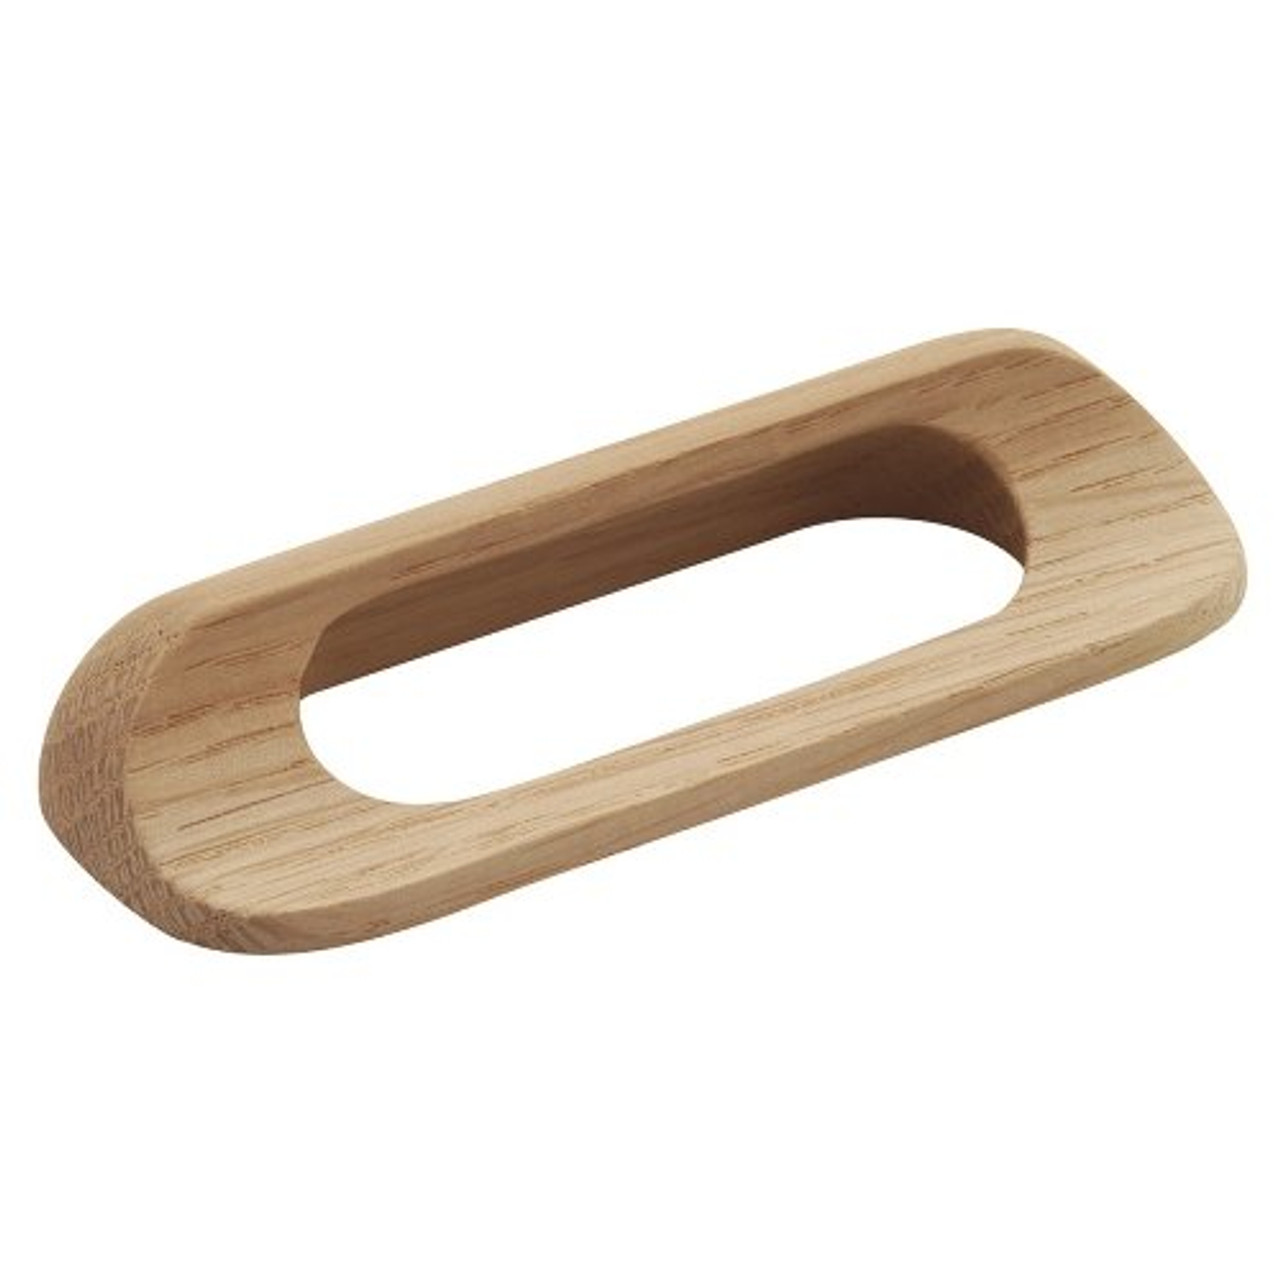 Hickory Hardware 3-3/4 INCH (96MM) NATURAL WOODCRAFT UNFINISHED WOOD CABINET CUP PULL P676